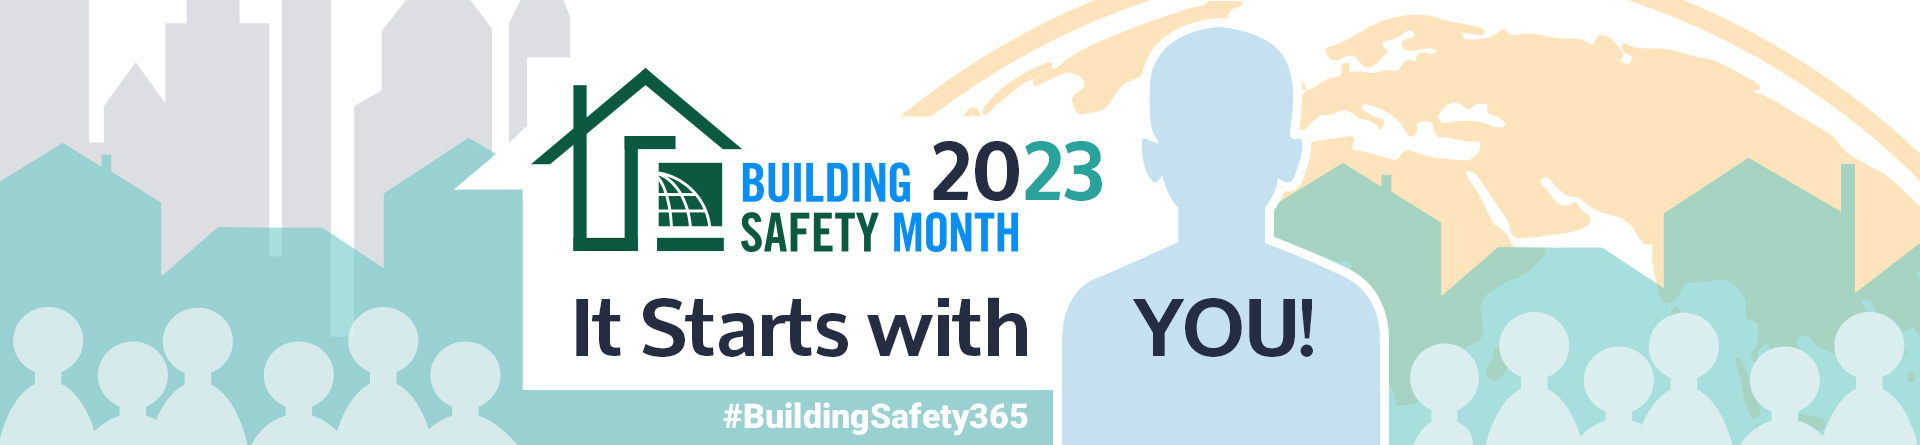 About Building Safety Month